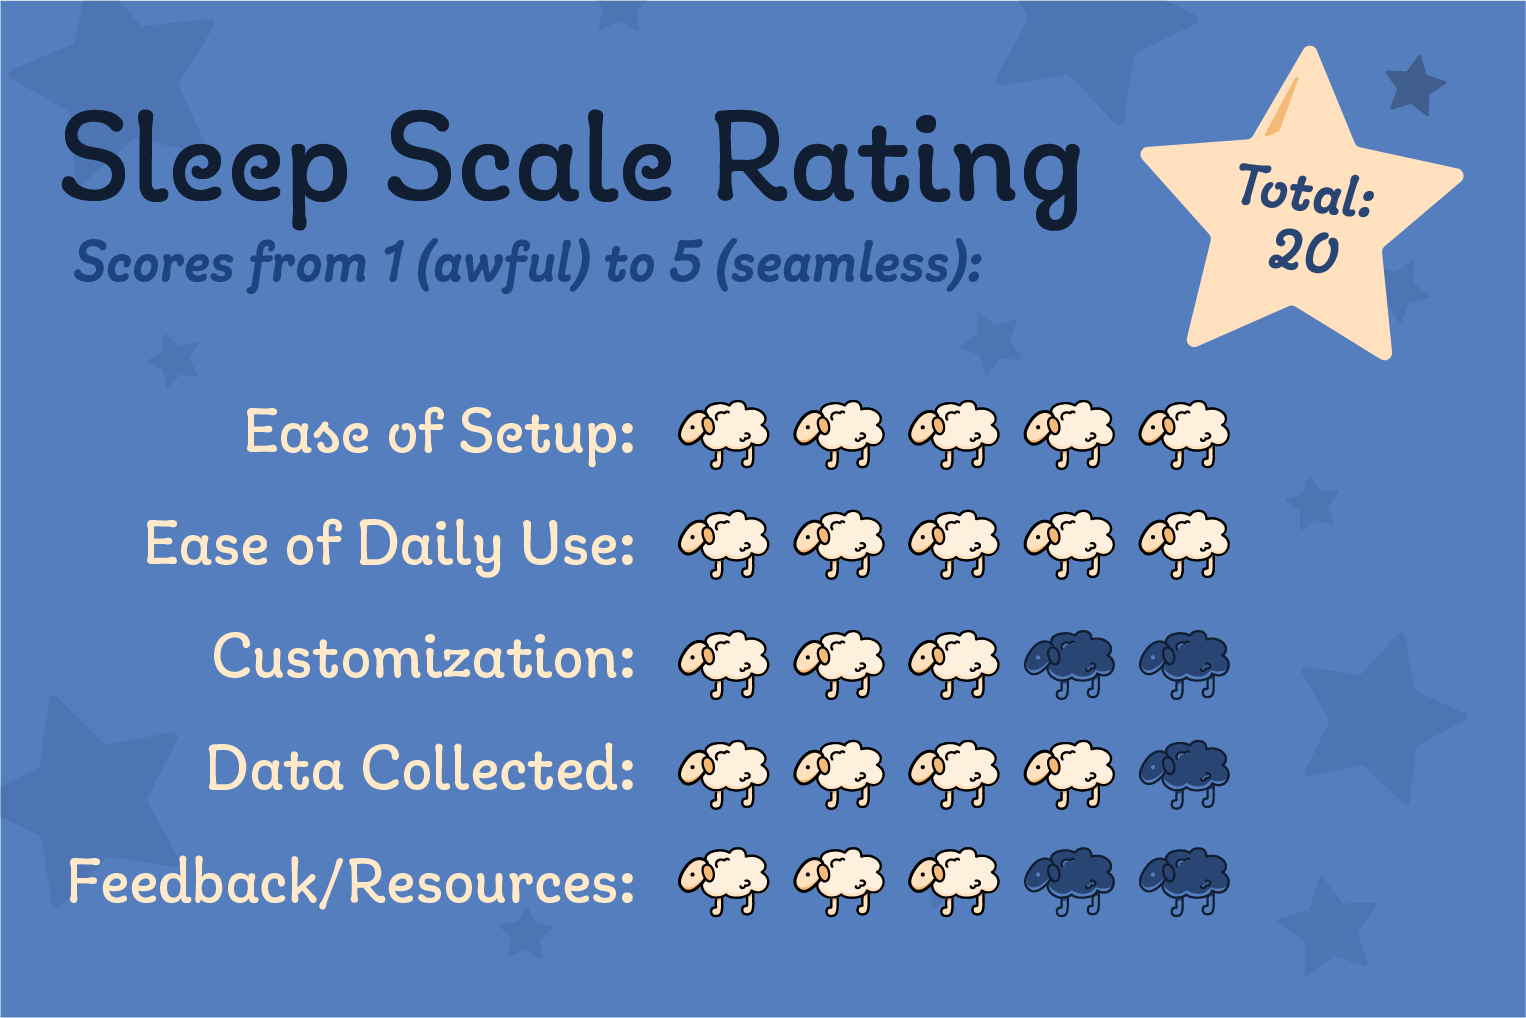 Scores from 1 (awful) to 5 (seamless):<br />
Ease of setup: 5<br />
Ease of daily use: 5<br />
Customization: 3<br />
Data collected: 4<br />
Feedback and resources: 3<br />
Total: 20